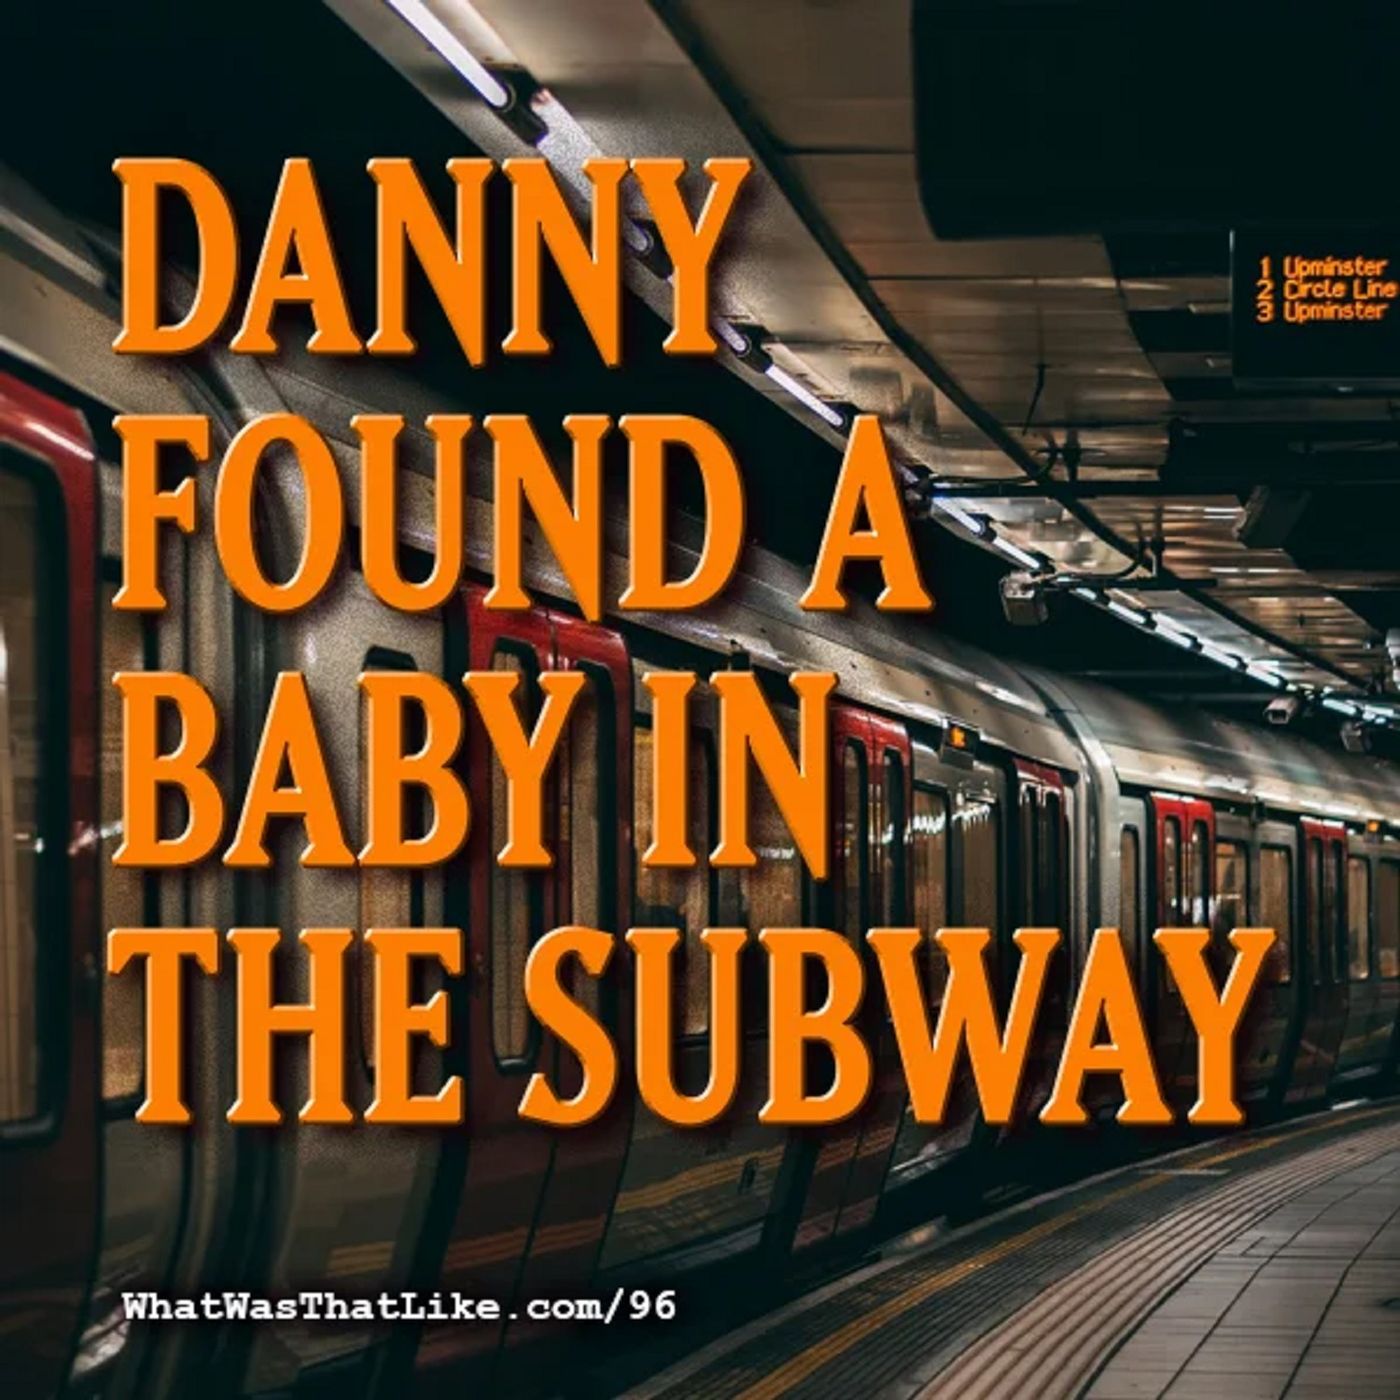 Danny found a baby in the subway by What Was That Like